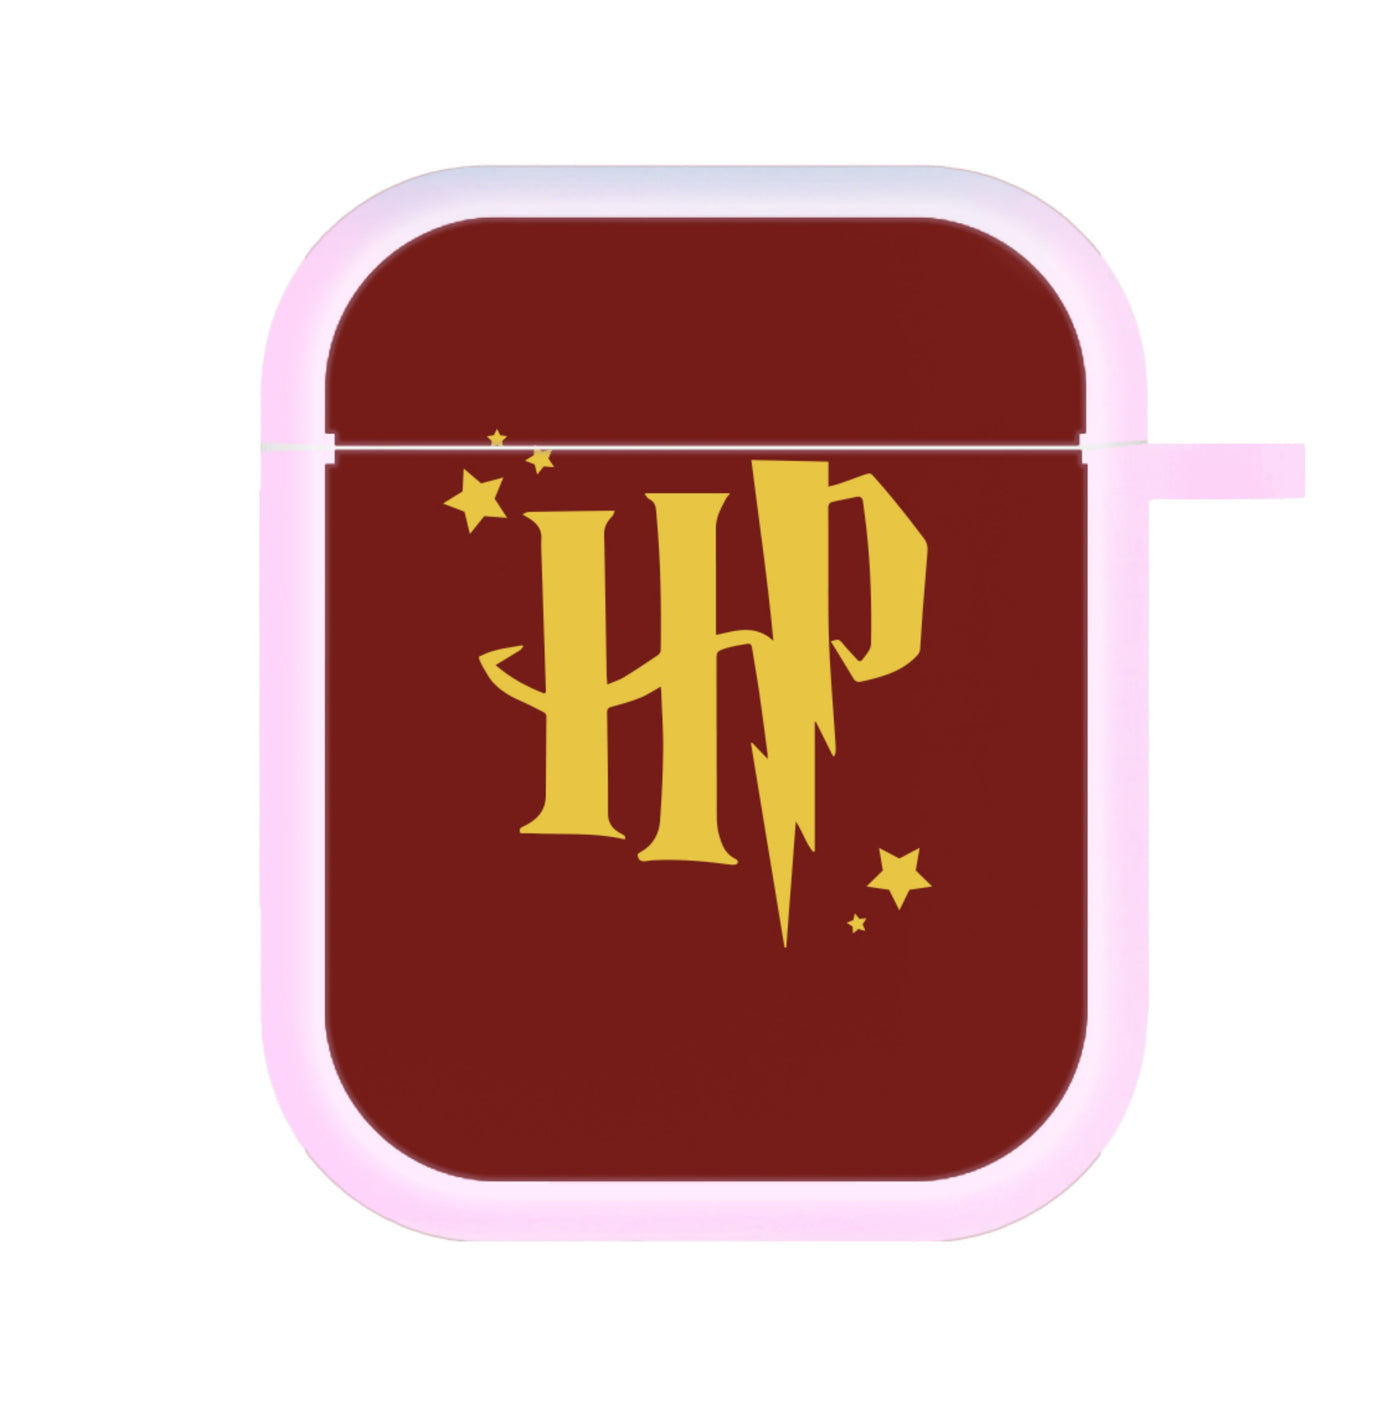 HP - Harry Potter AirPods Case